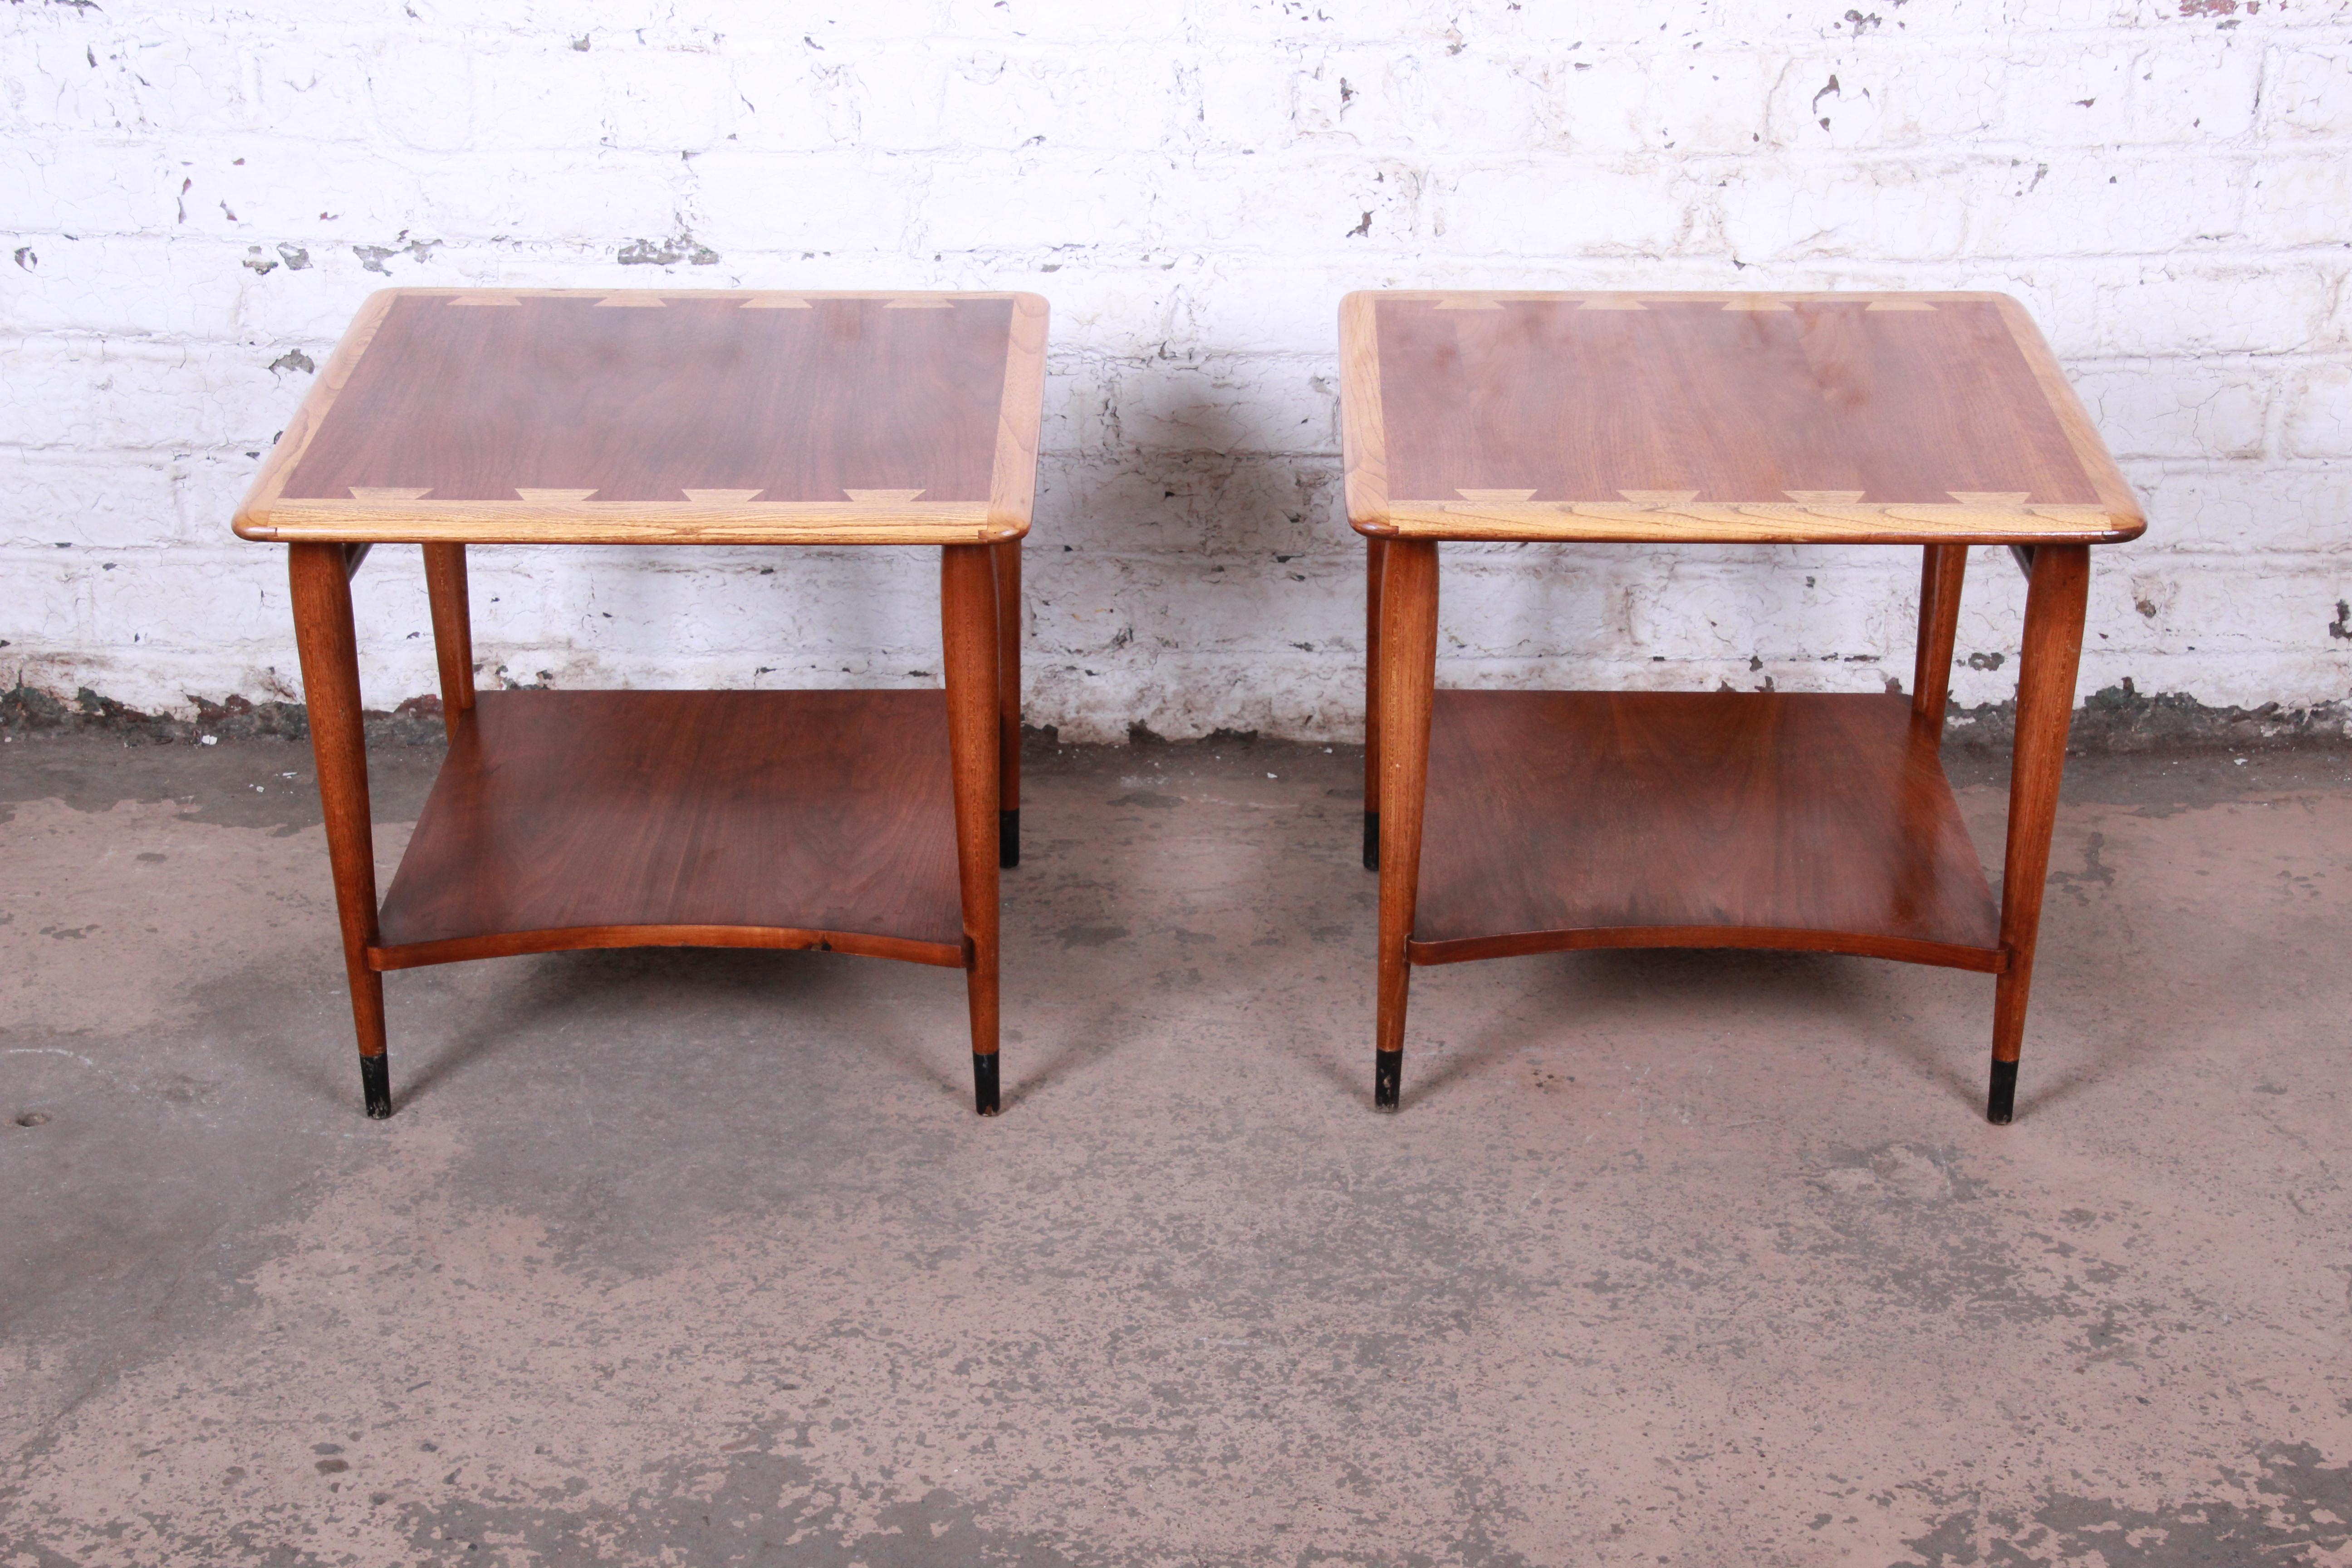 A beautiful pair of Mid-Century Modern side tables from the Acclaim line by Lane. The tables features gorgeous walnut wood grain with the iconic ash dovetails. They have sculpted solid walnut legs and stretchers and ebonized feet. The original